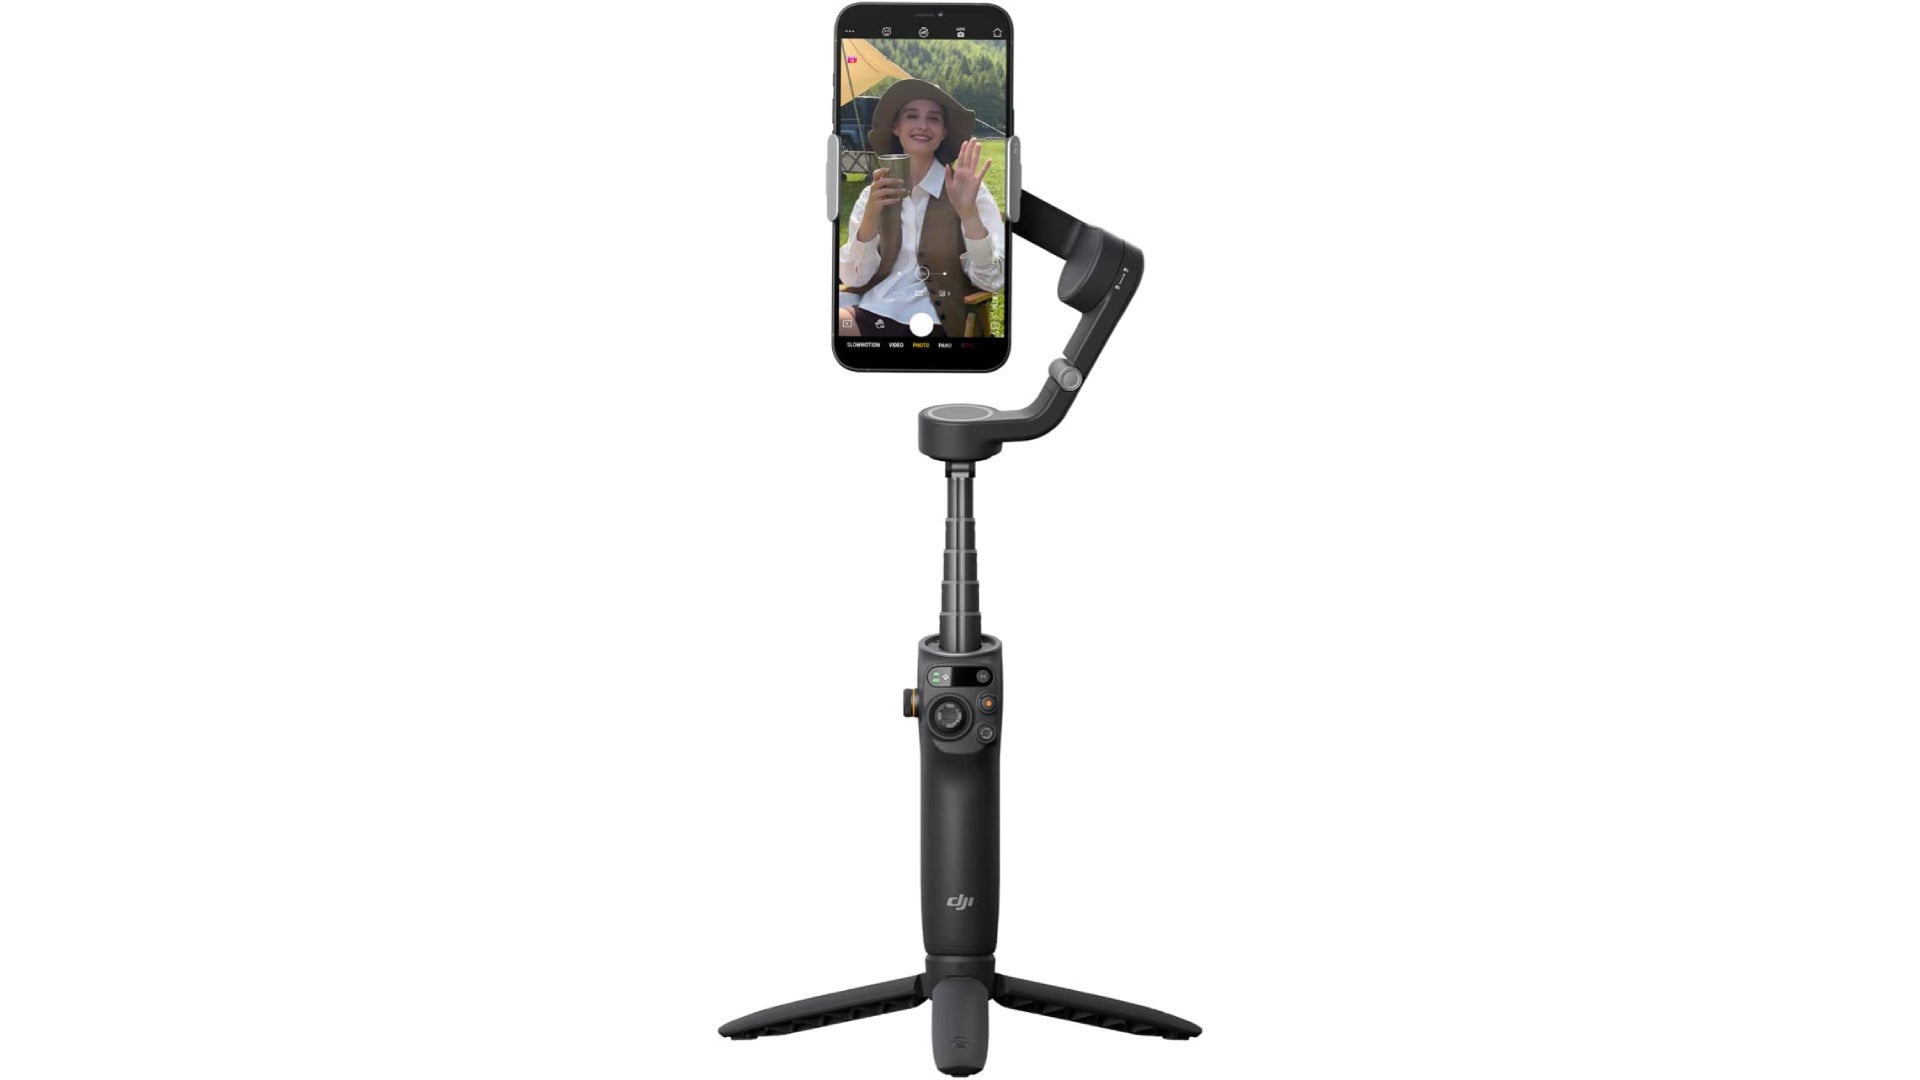 DJI Osmo Mobile 6 gimbal/tripod. - Best phone tripods for video calls, vlogging, or live streaming